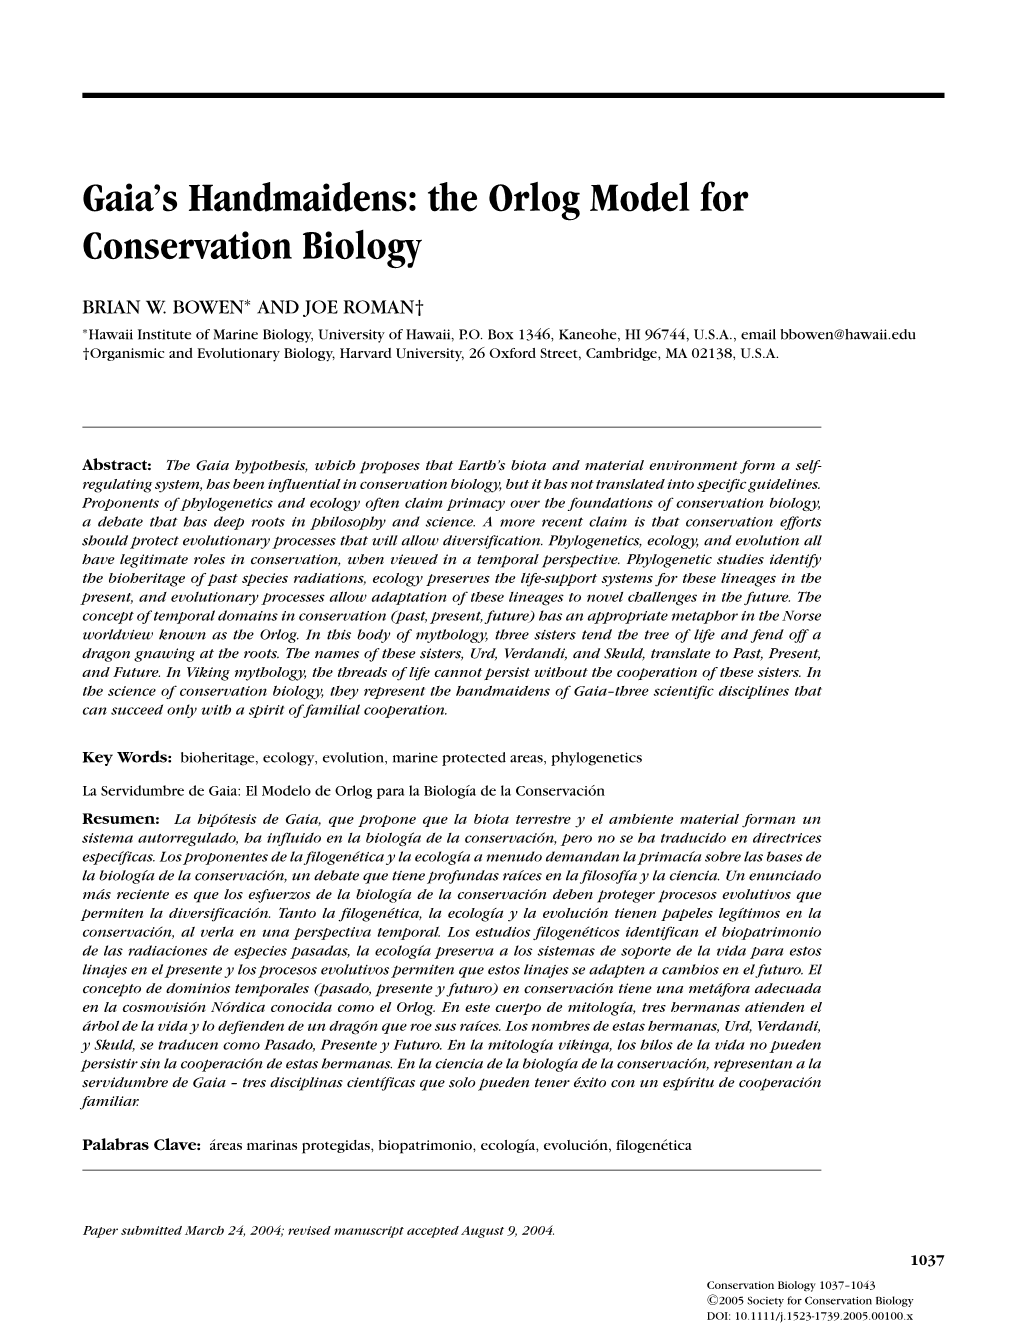 Gaia's Handmaidens: the Orlog Model for Conservation Biology